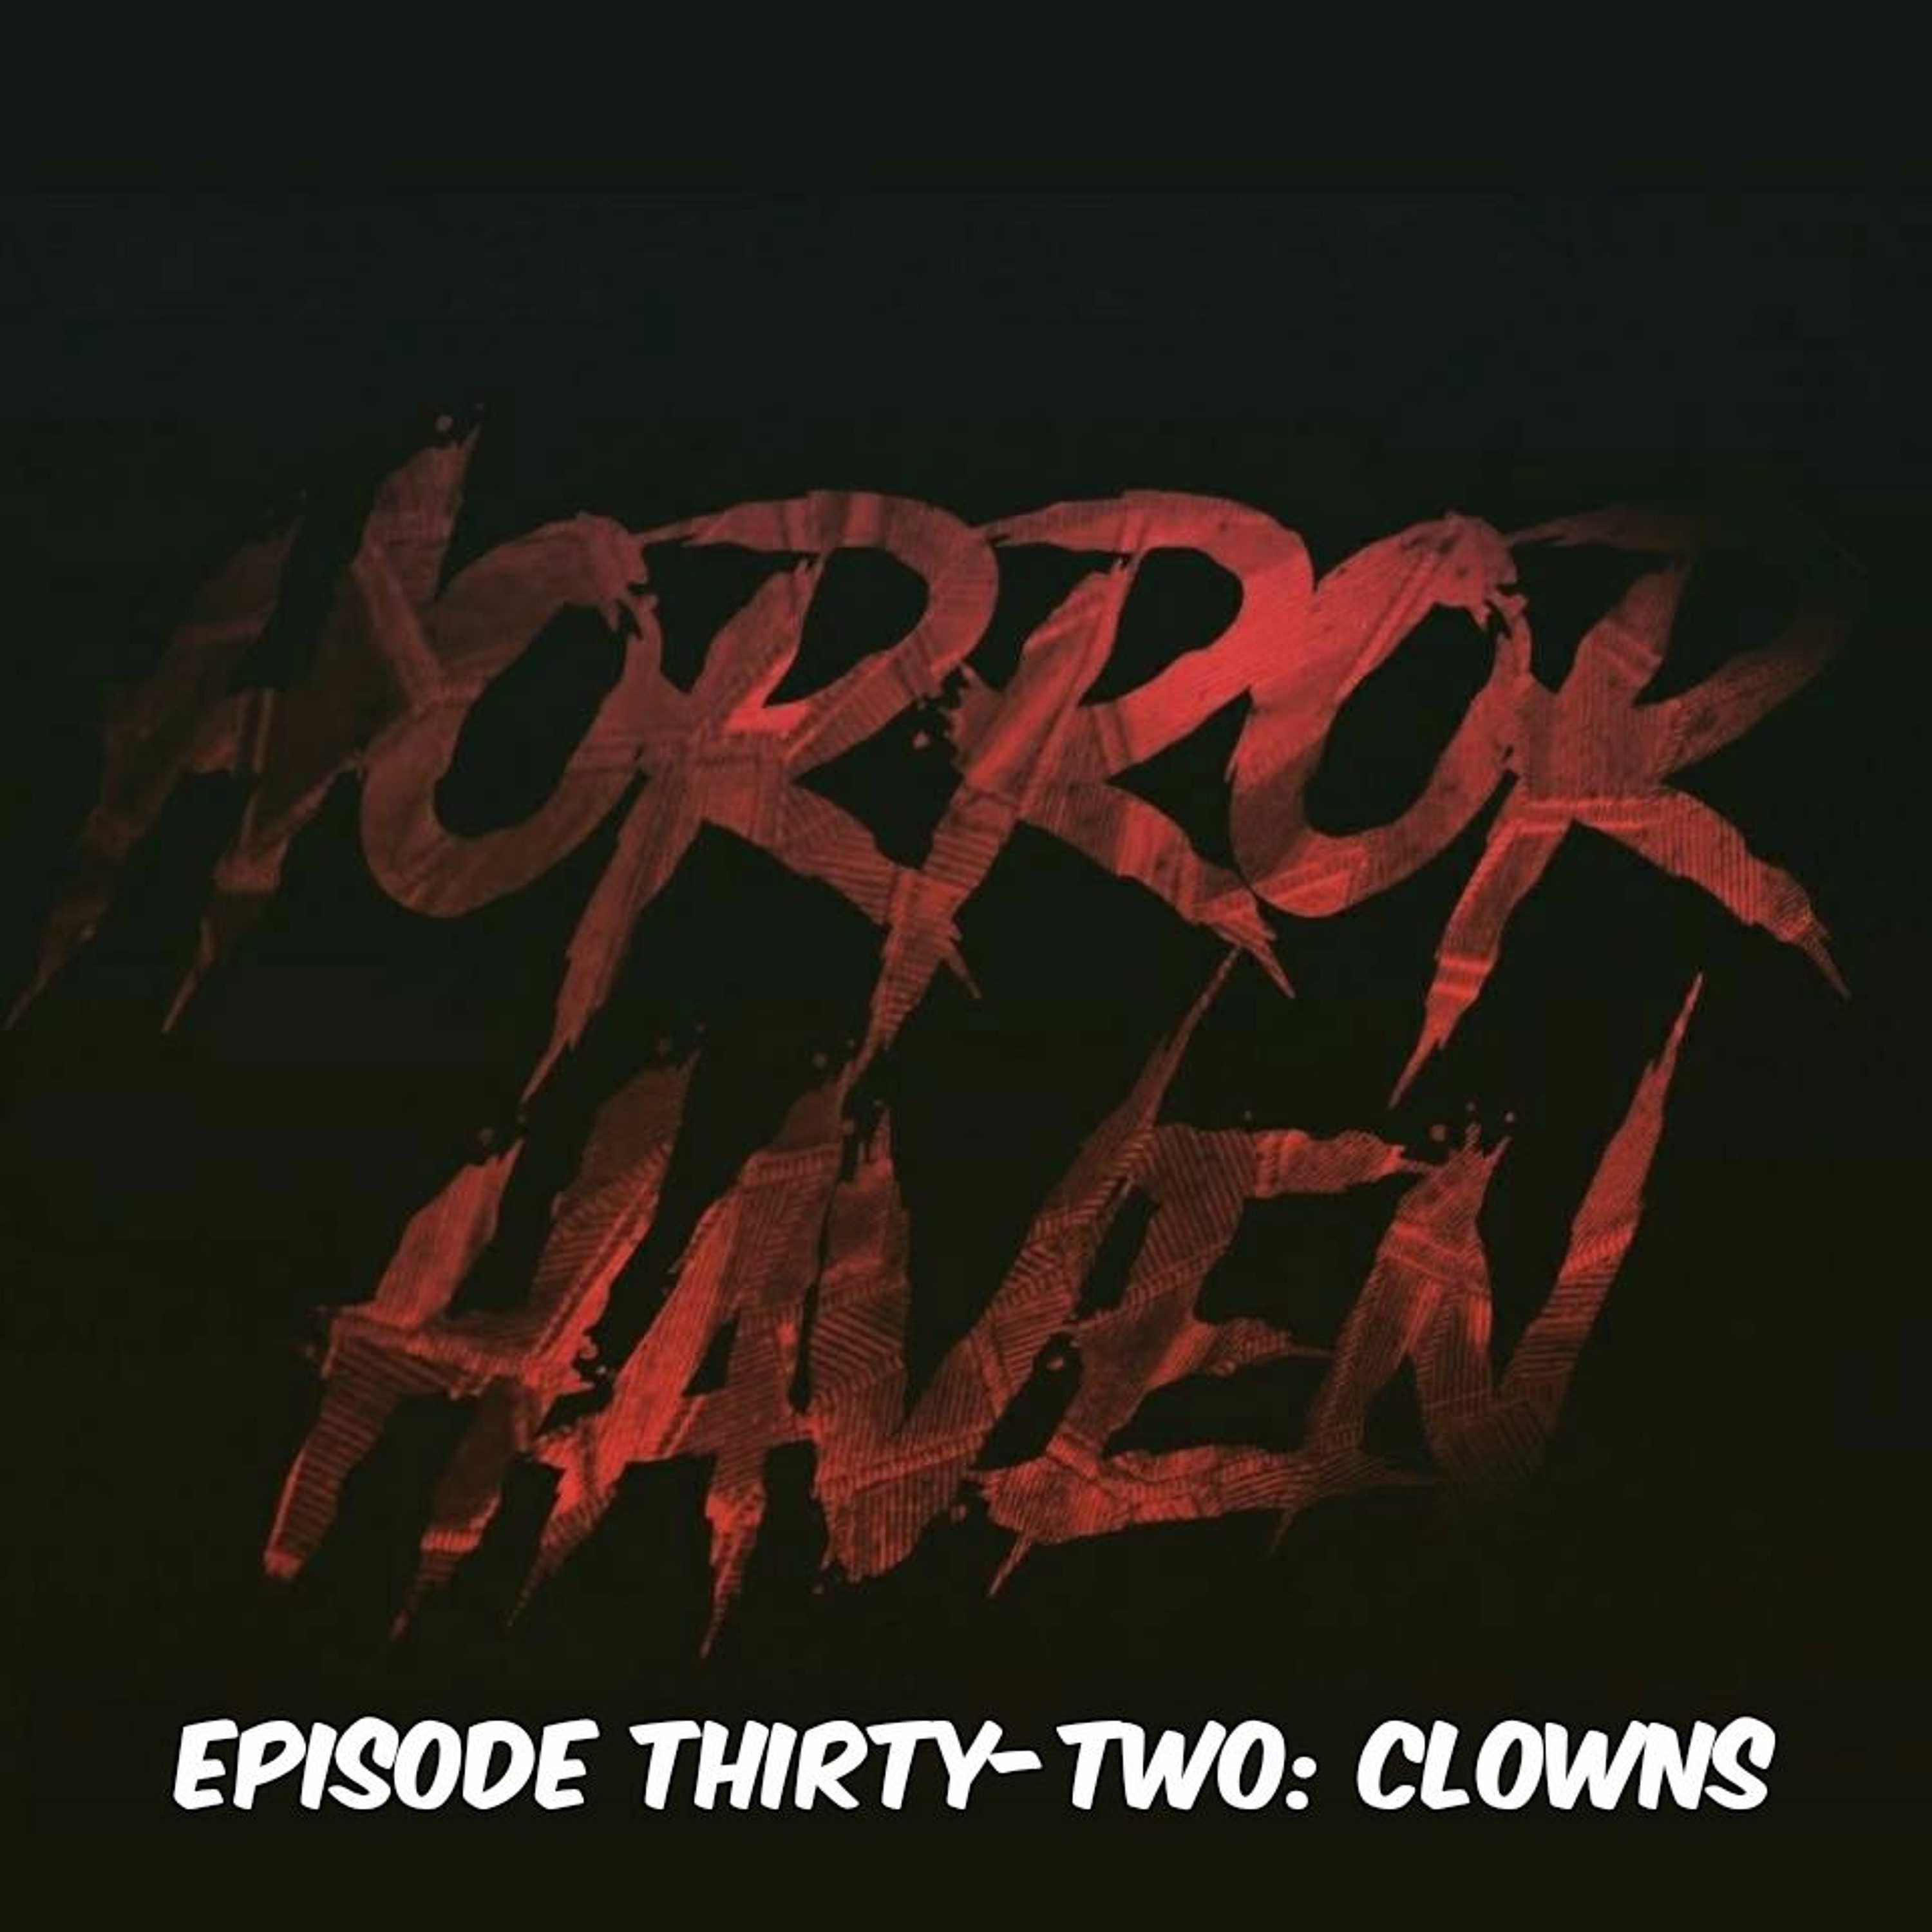 Episode Thirty-Two:  Clowns